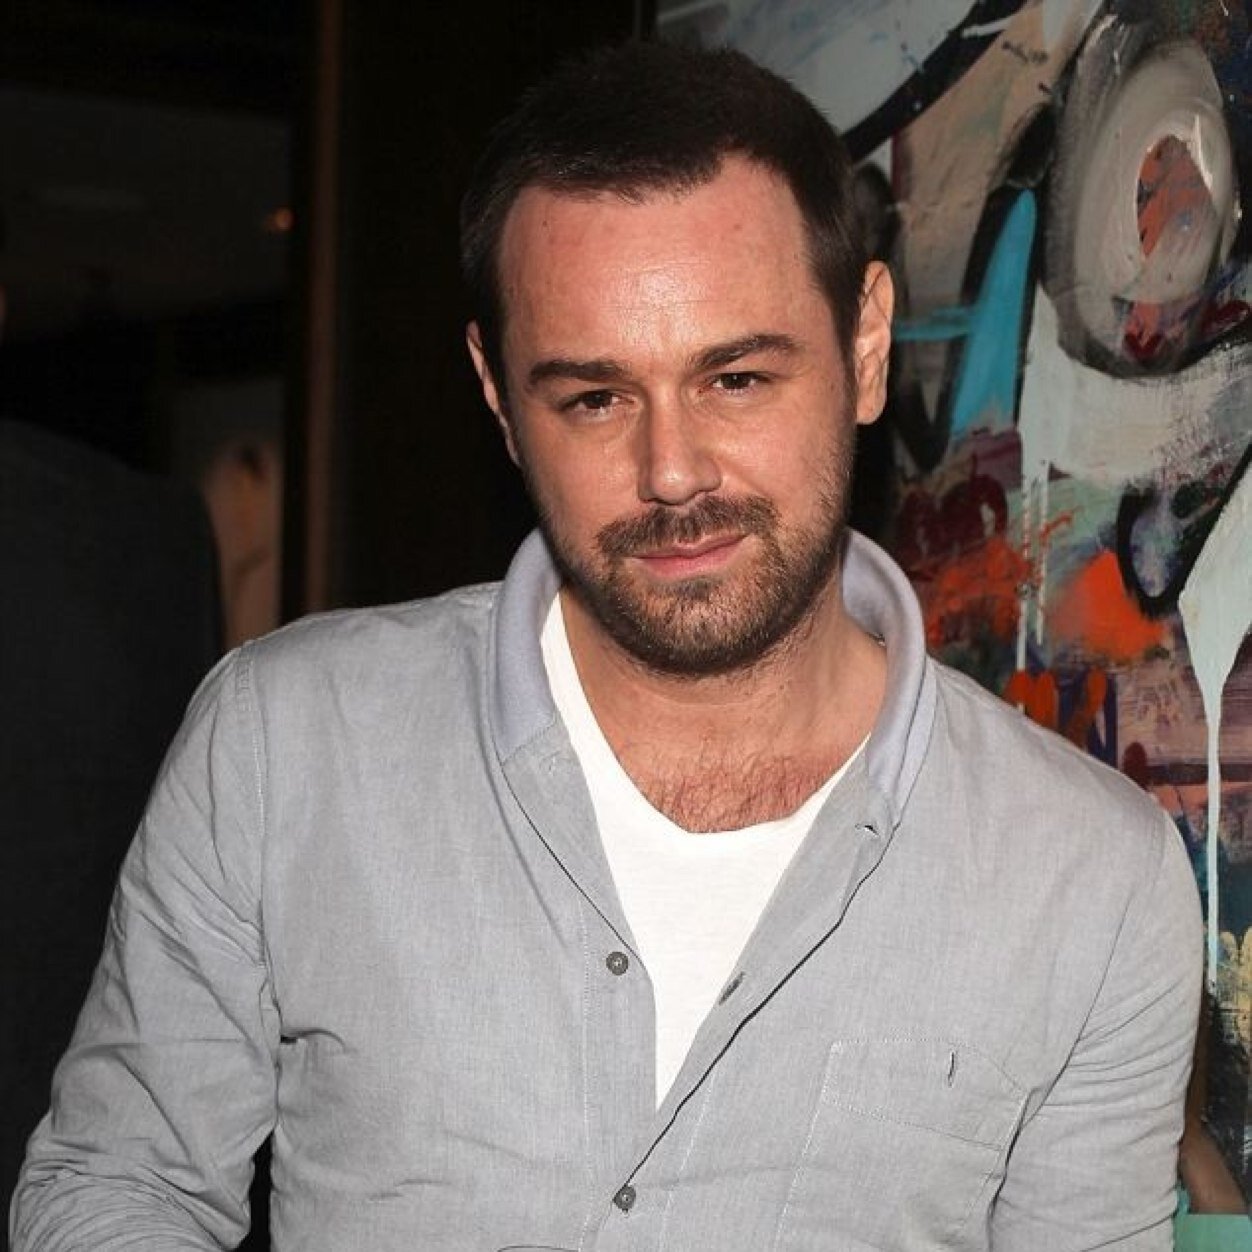 danny dyer is my idol, he's simply perfection♥; i follow back♥